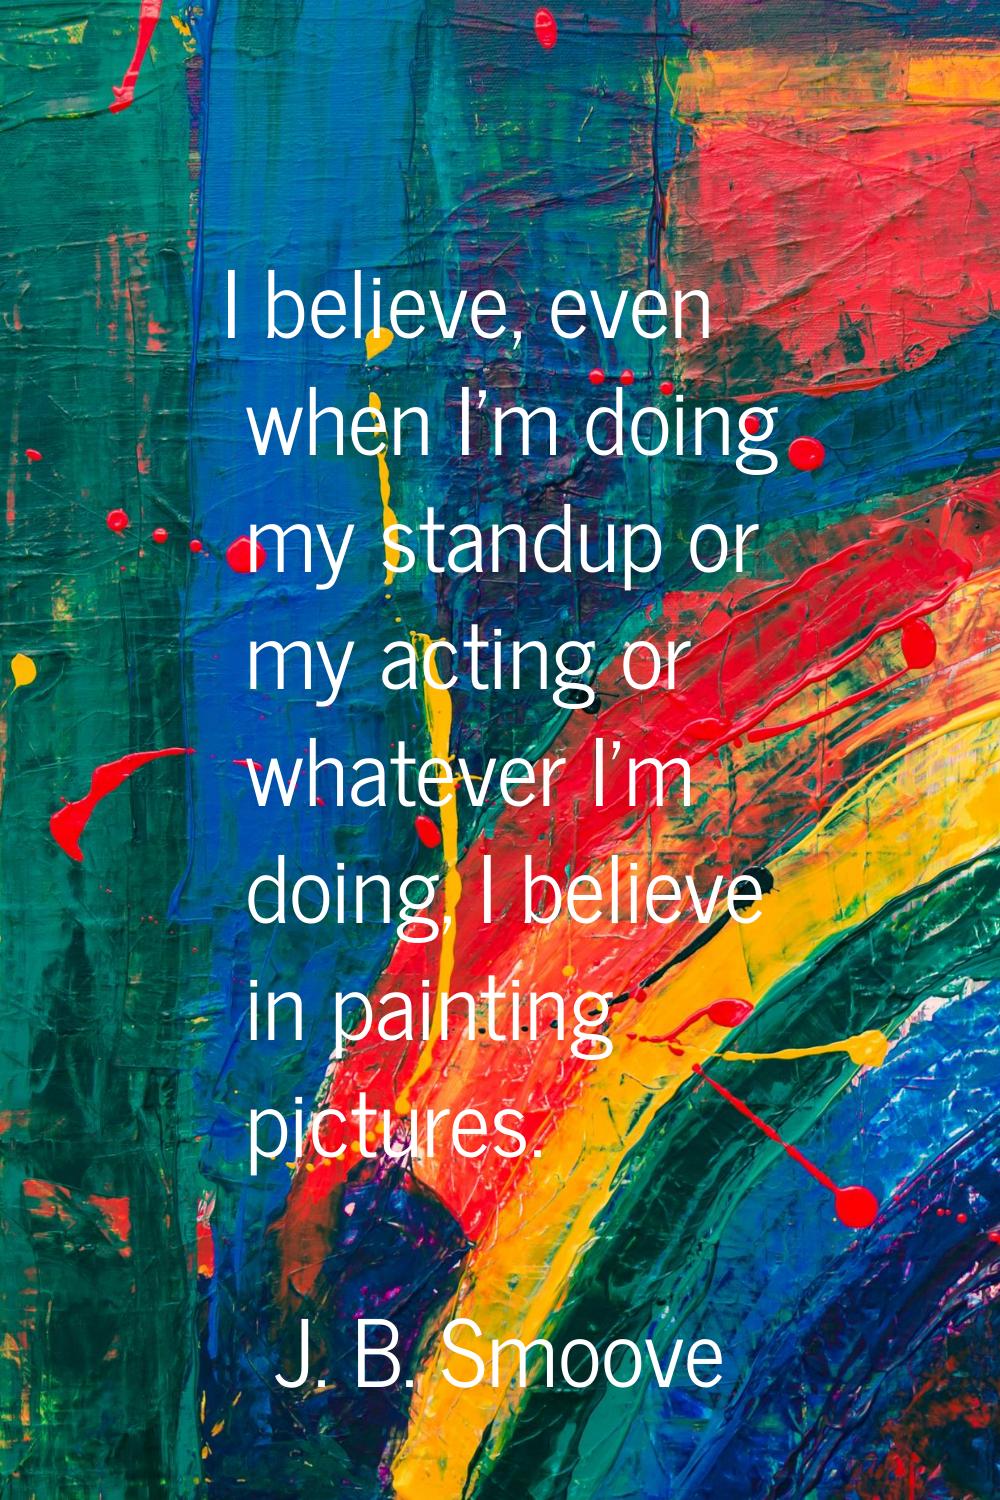 I believe, even when I'm doing my standup or my acting or whatever I'm doing, I believe in painting